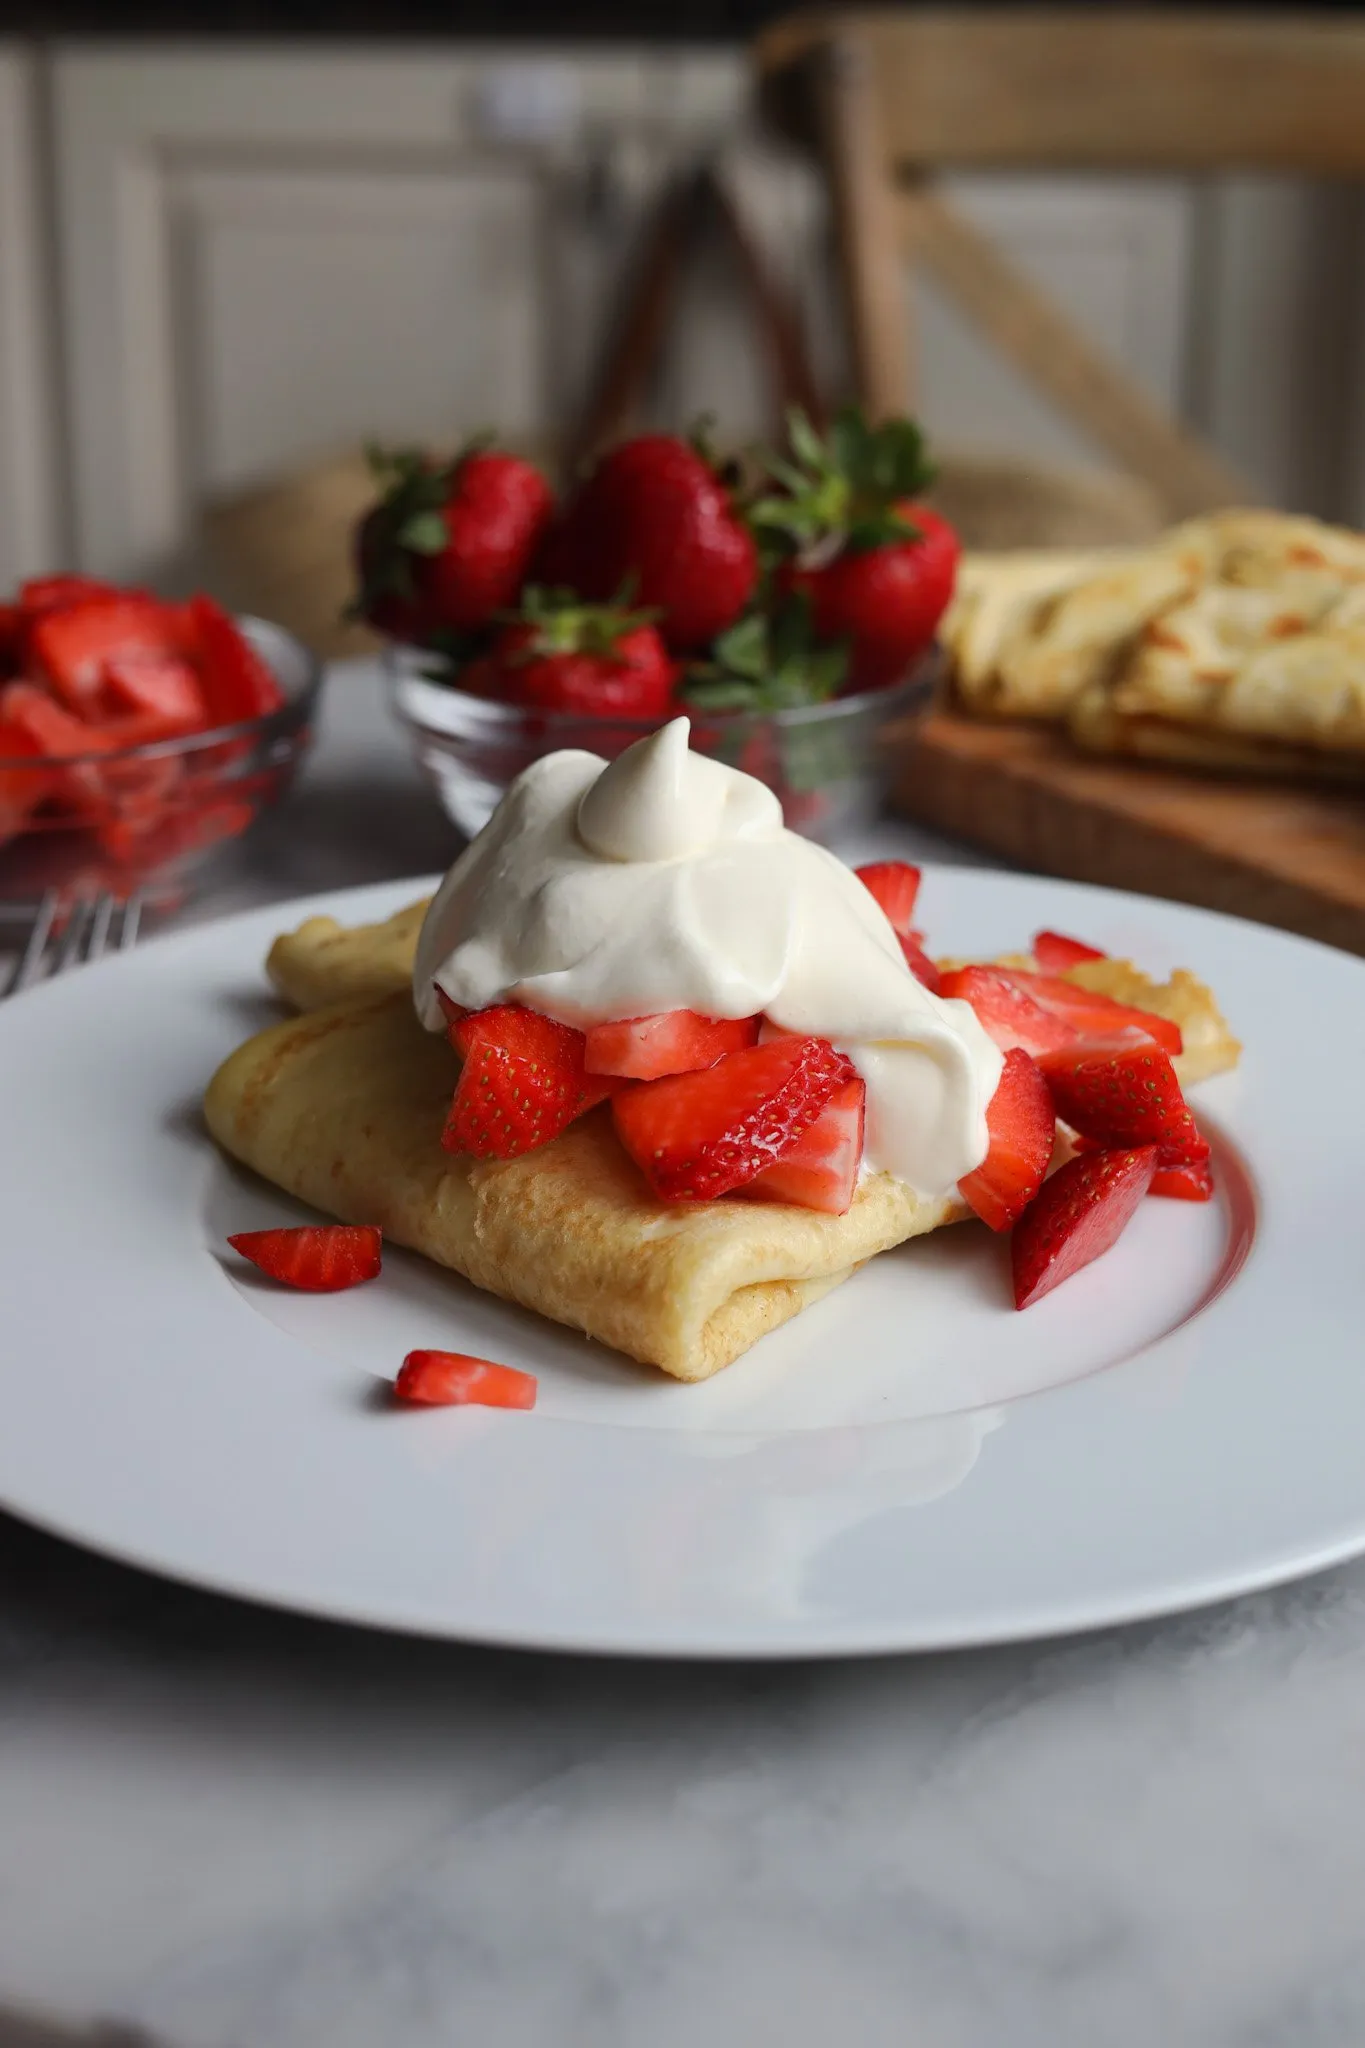 Chantilly cream over strawberry crepes